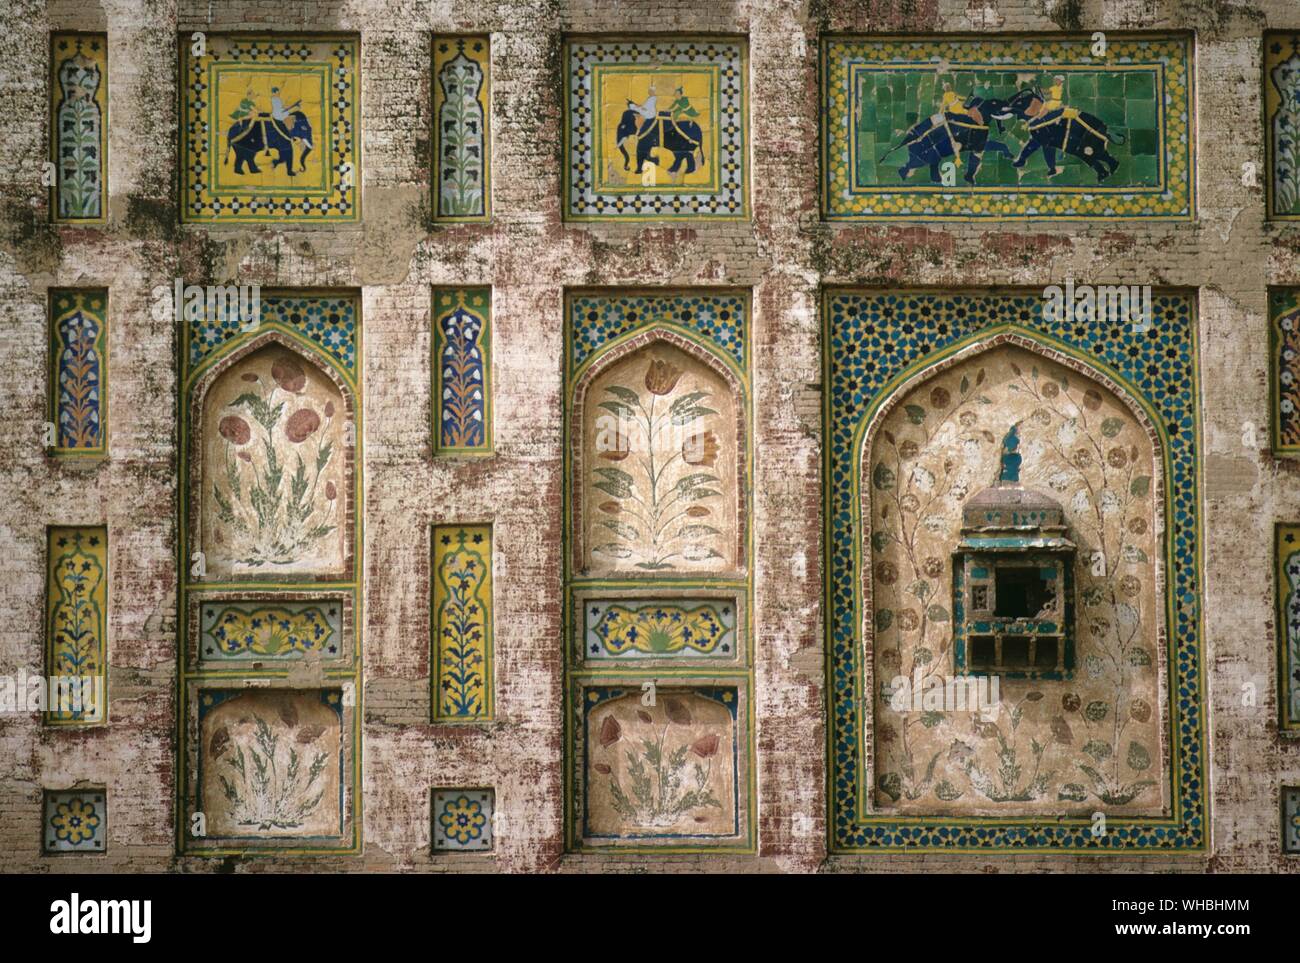 Tile work from the mid 17th Century of the Fort or Citadel in Lahore , Pakistan Stock Photo